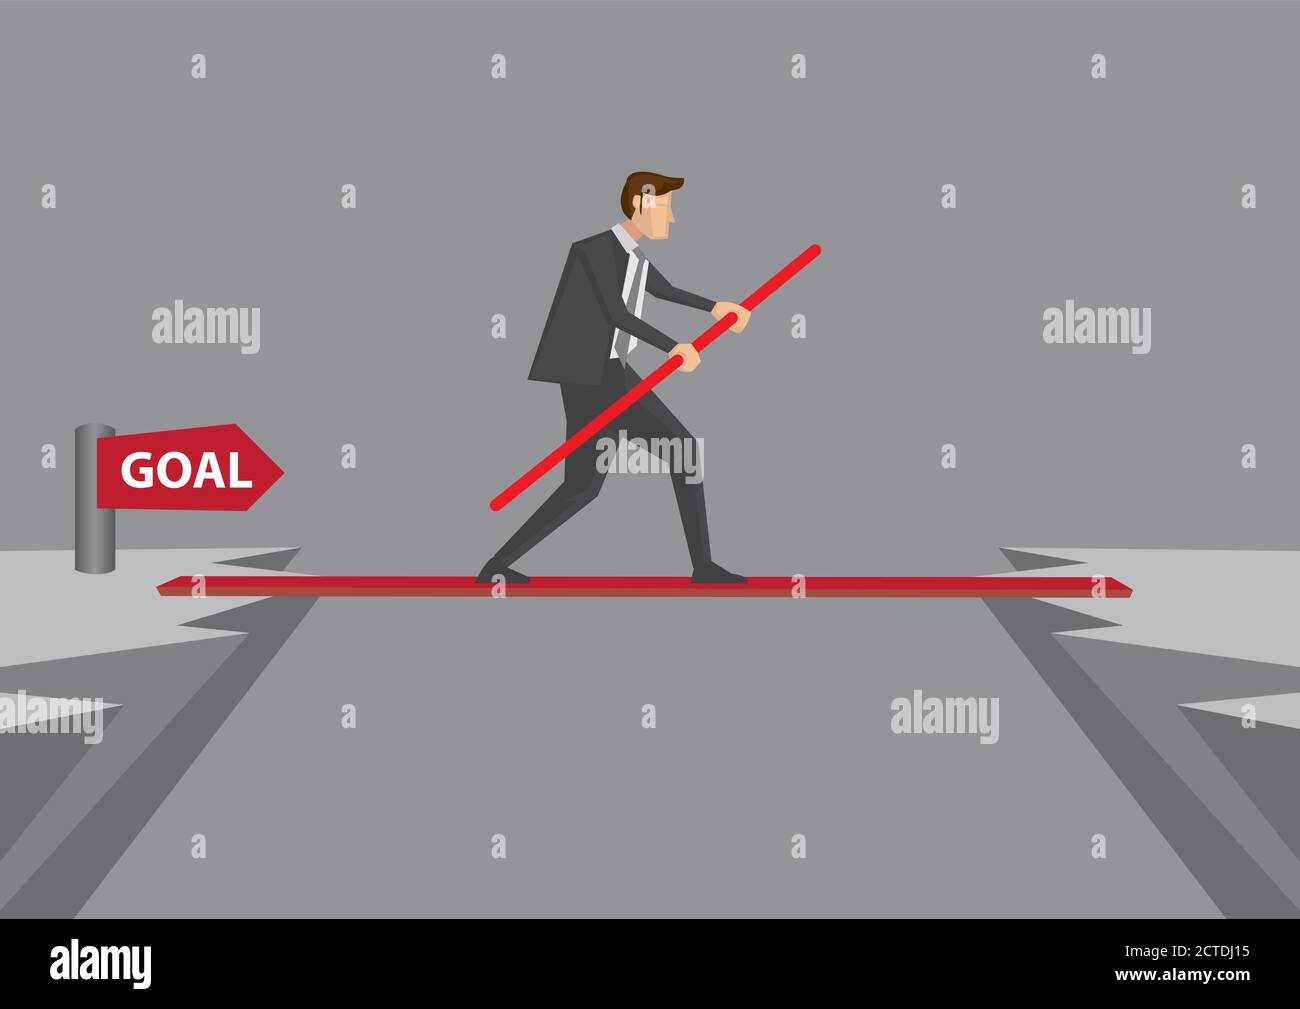 Man in business suit concentrating and balancing on tightrope to reach goal on other side of cliff. Conceptual vector illustration for taking risk and Stock Vector